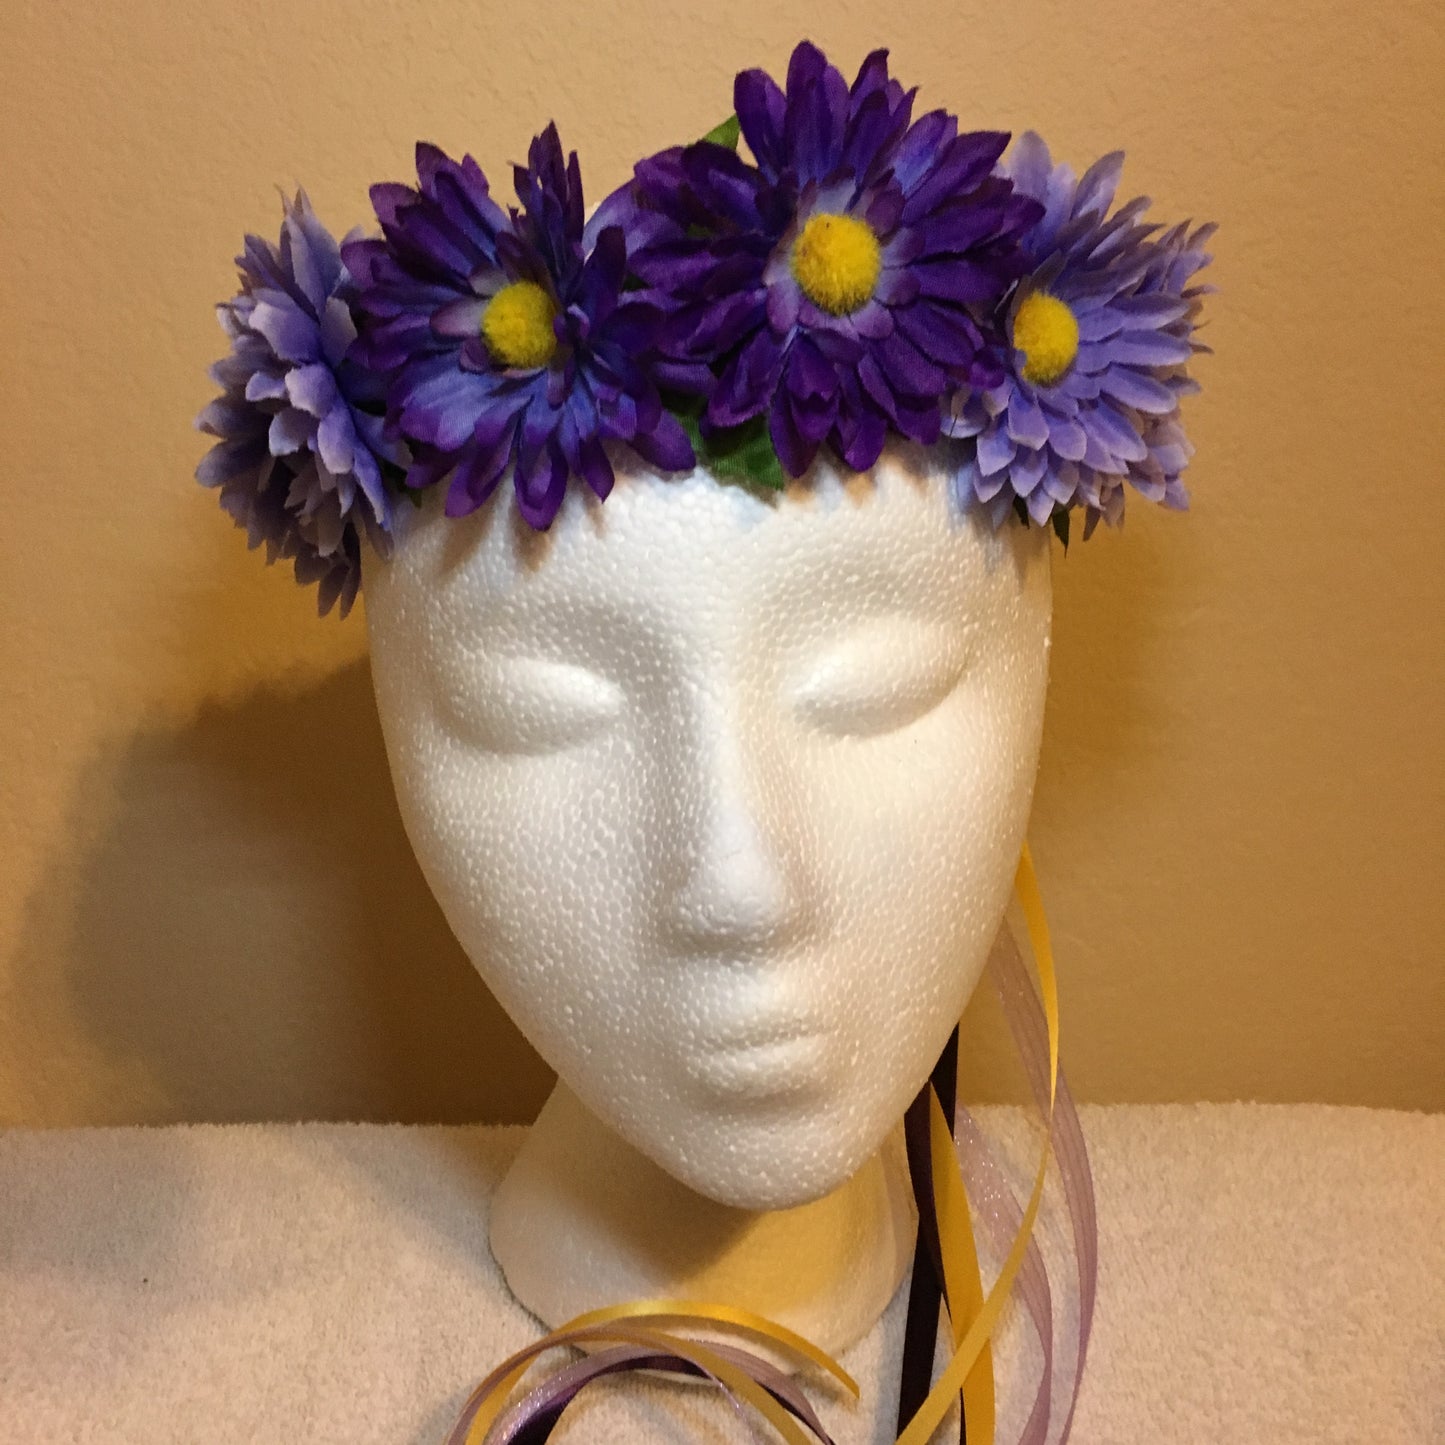 Small Wreath - Light and dark purple patterned daisies